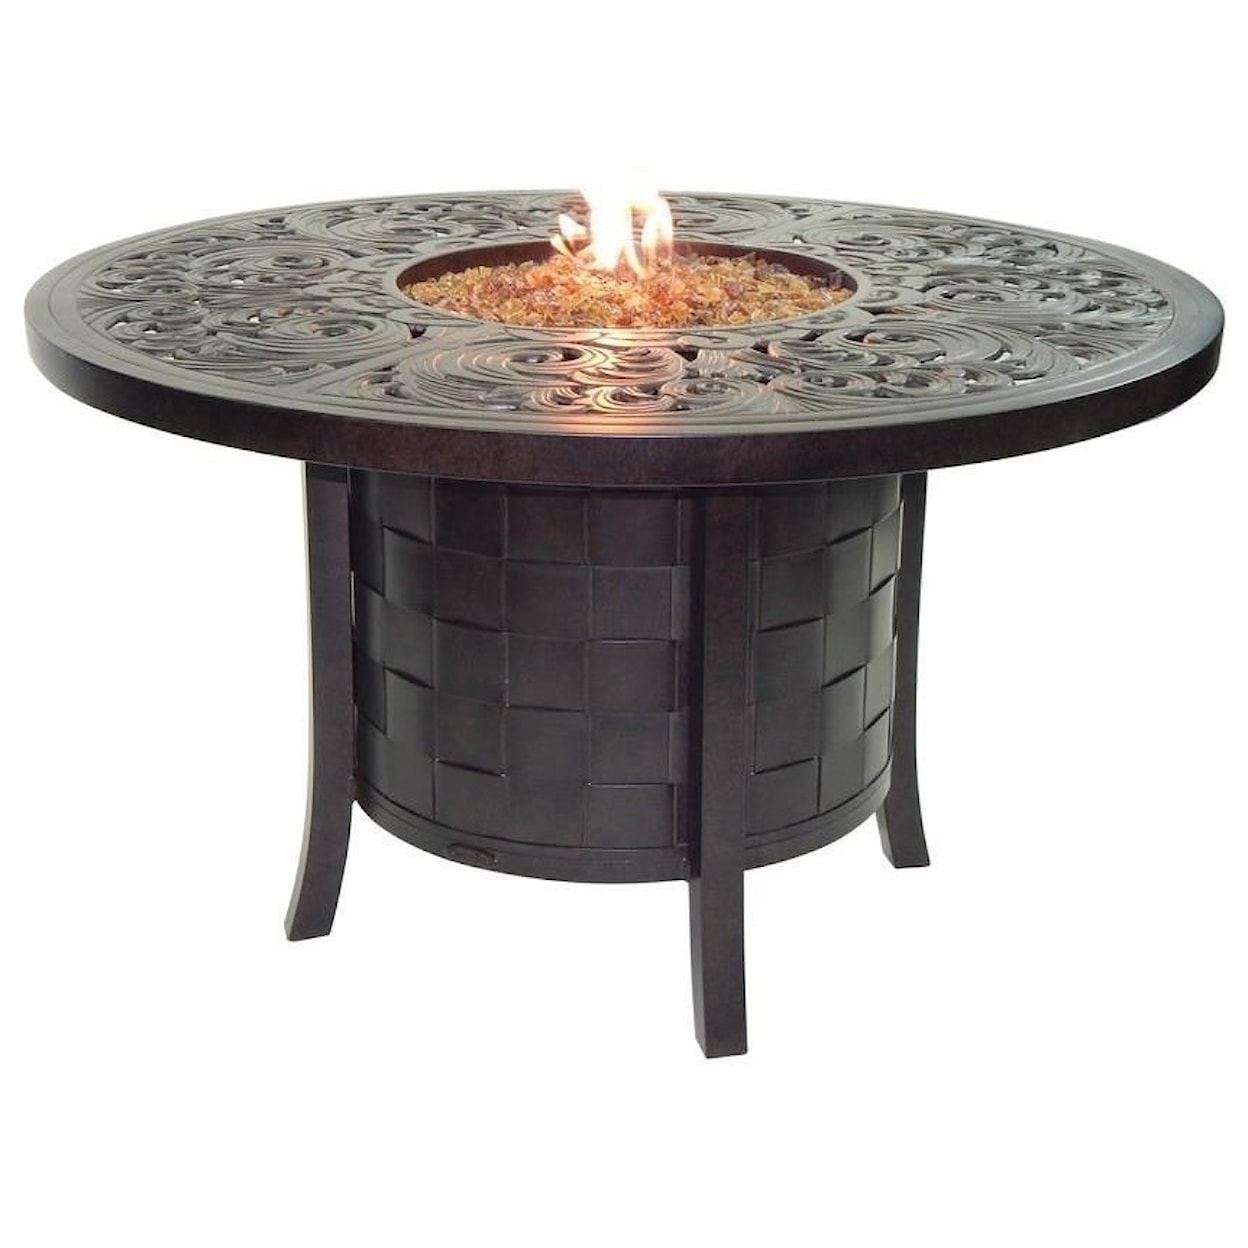 Castelle by Pride Family Brands Classical Firepits 49" Round Dining Table with Firepit